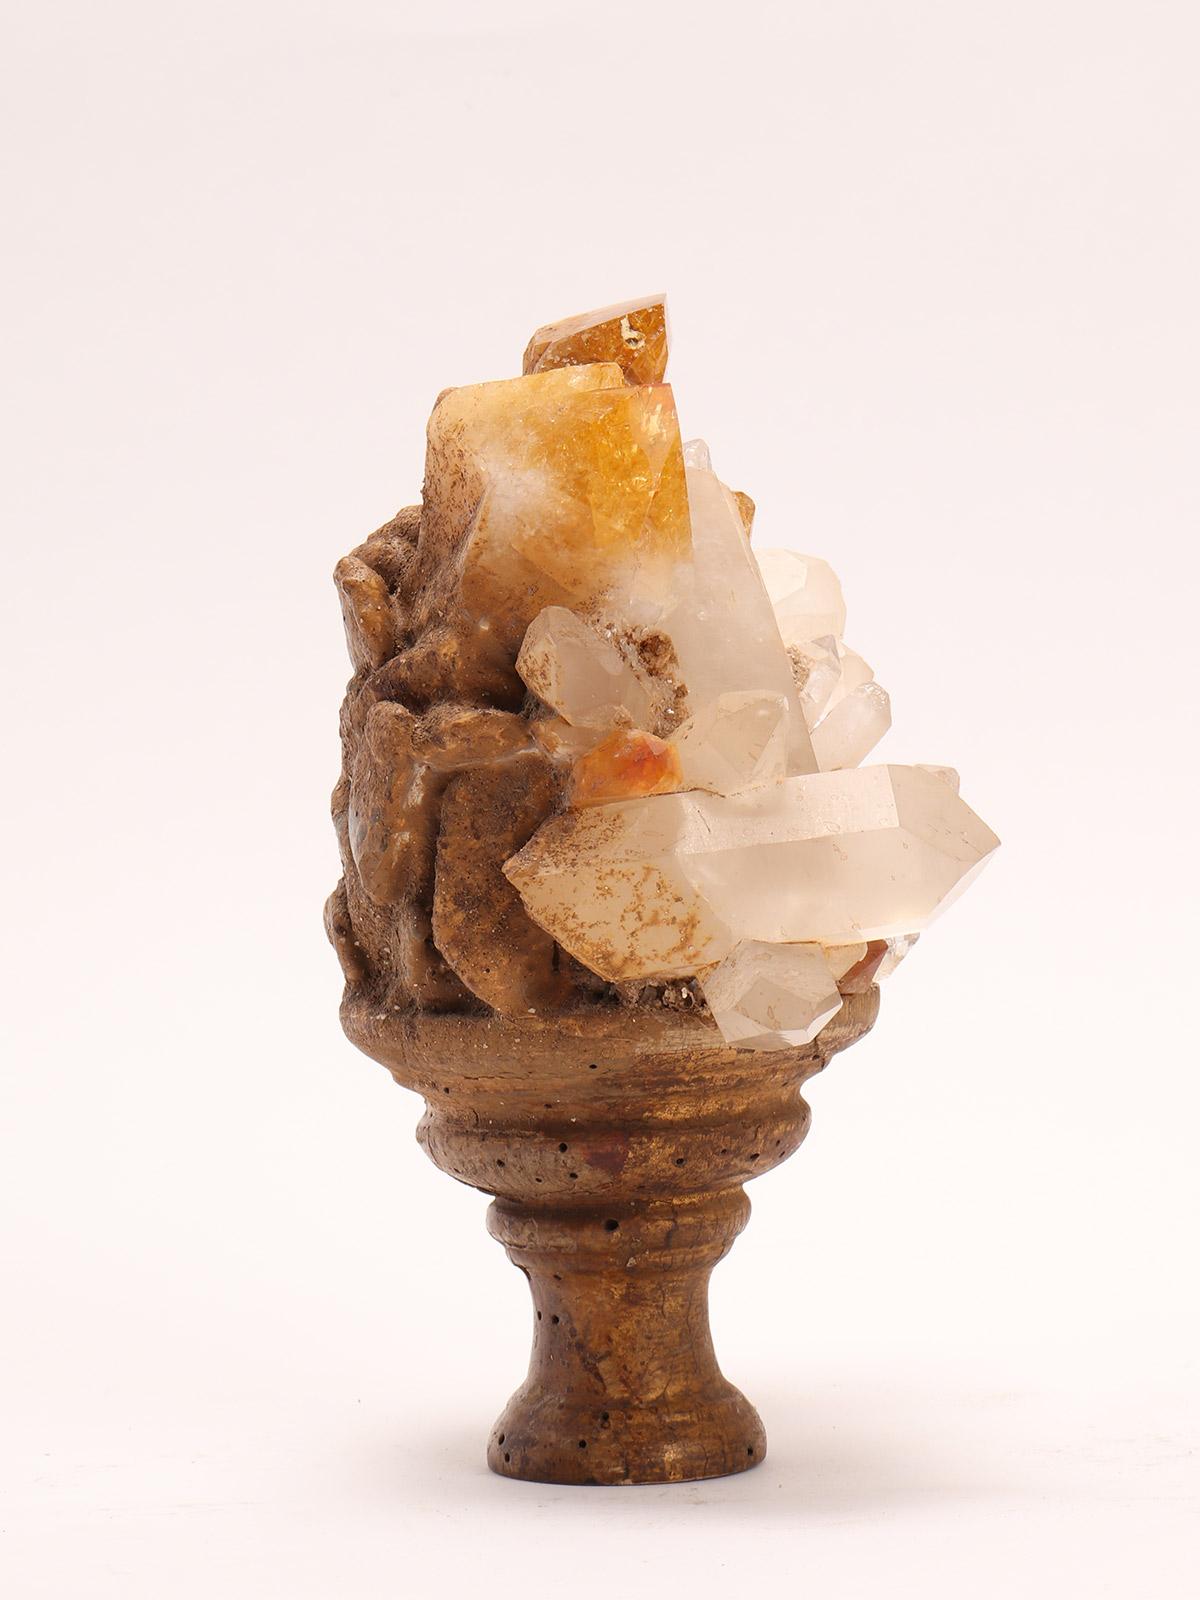 19th Century Natural Mineral Specimen: a Group of White and Smoke Quartz Crystals, Italy 1880